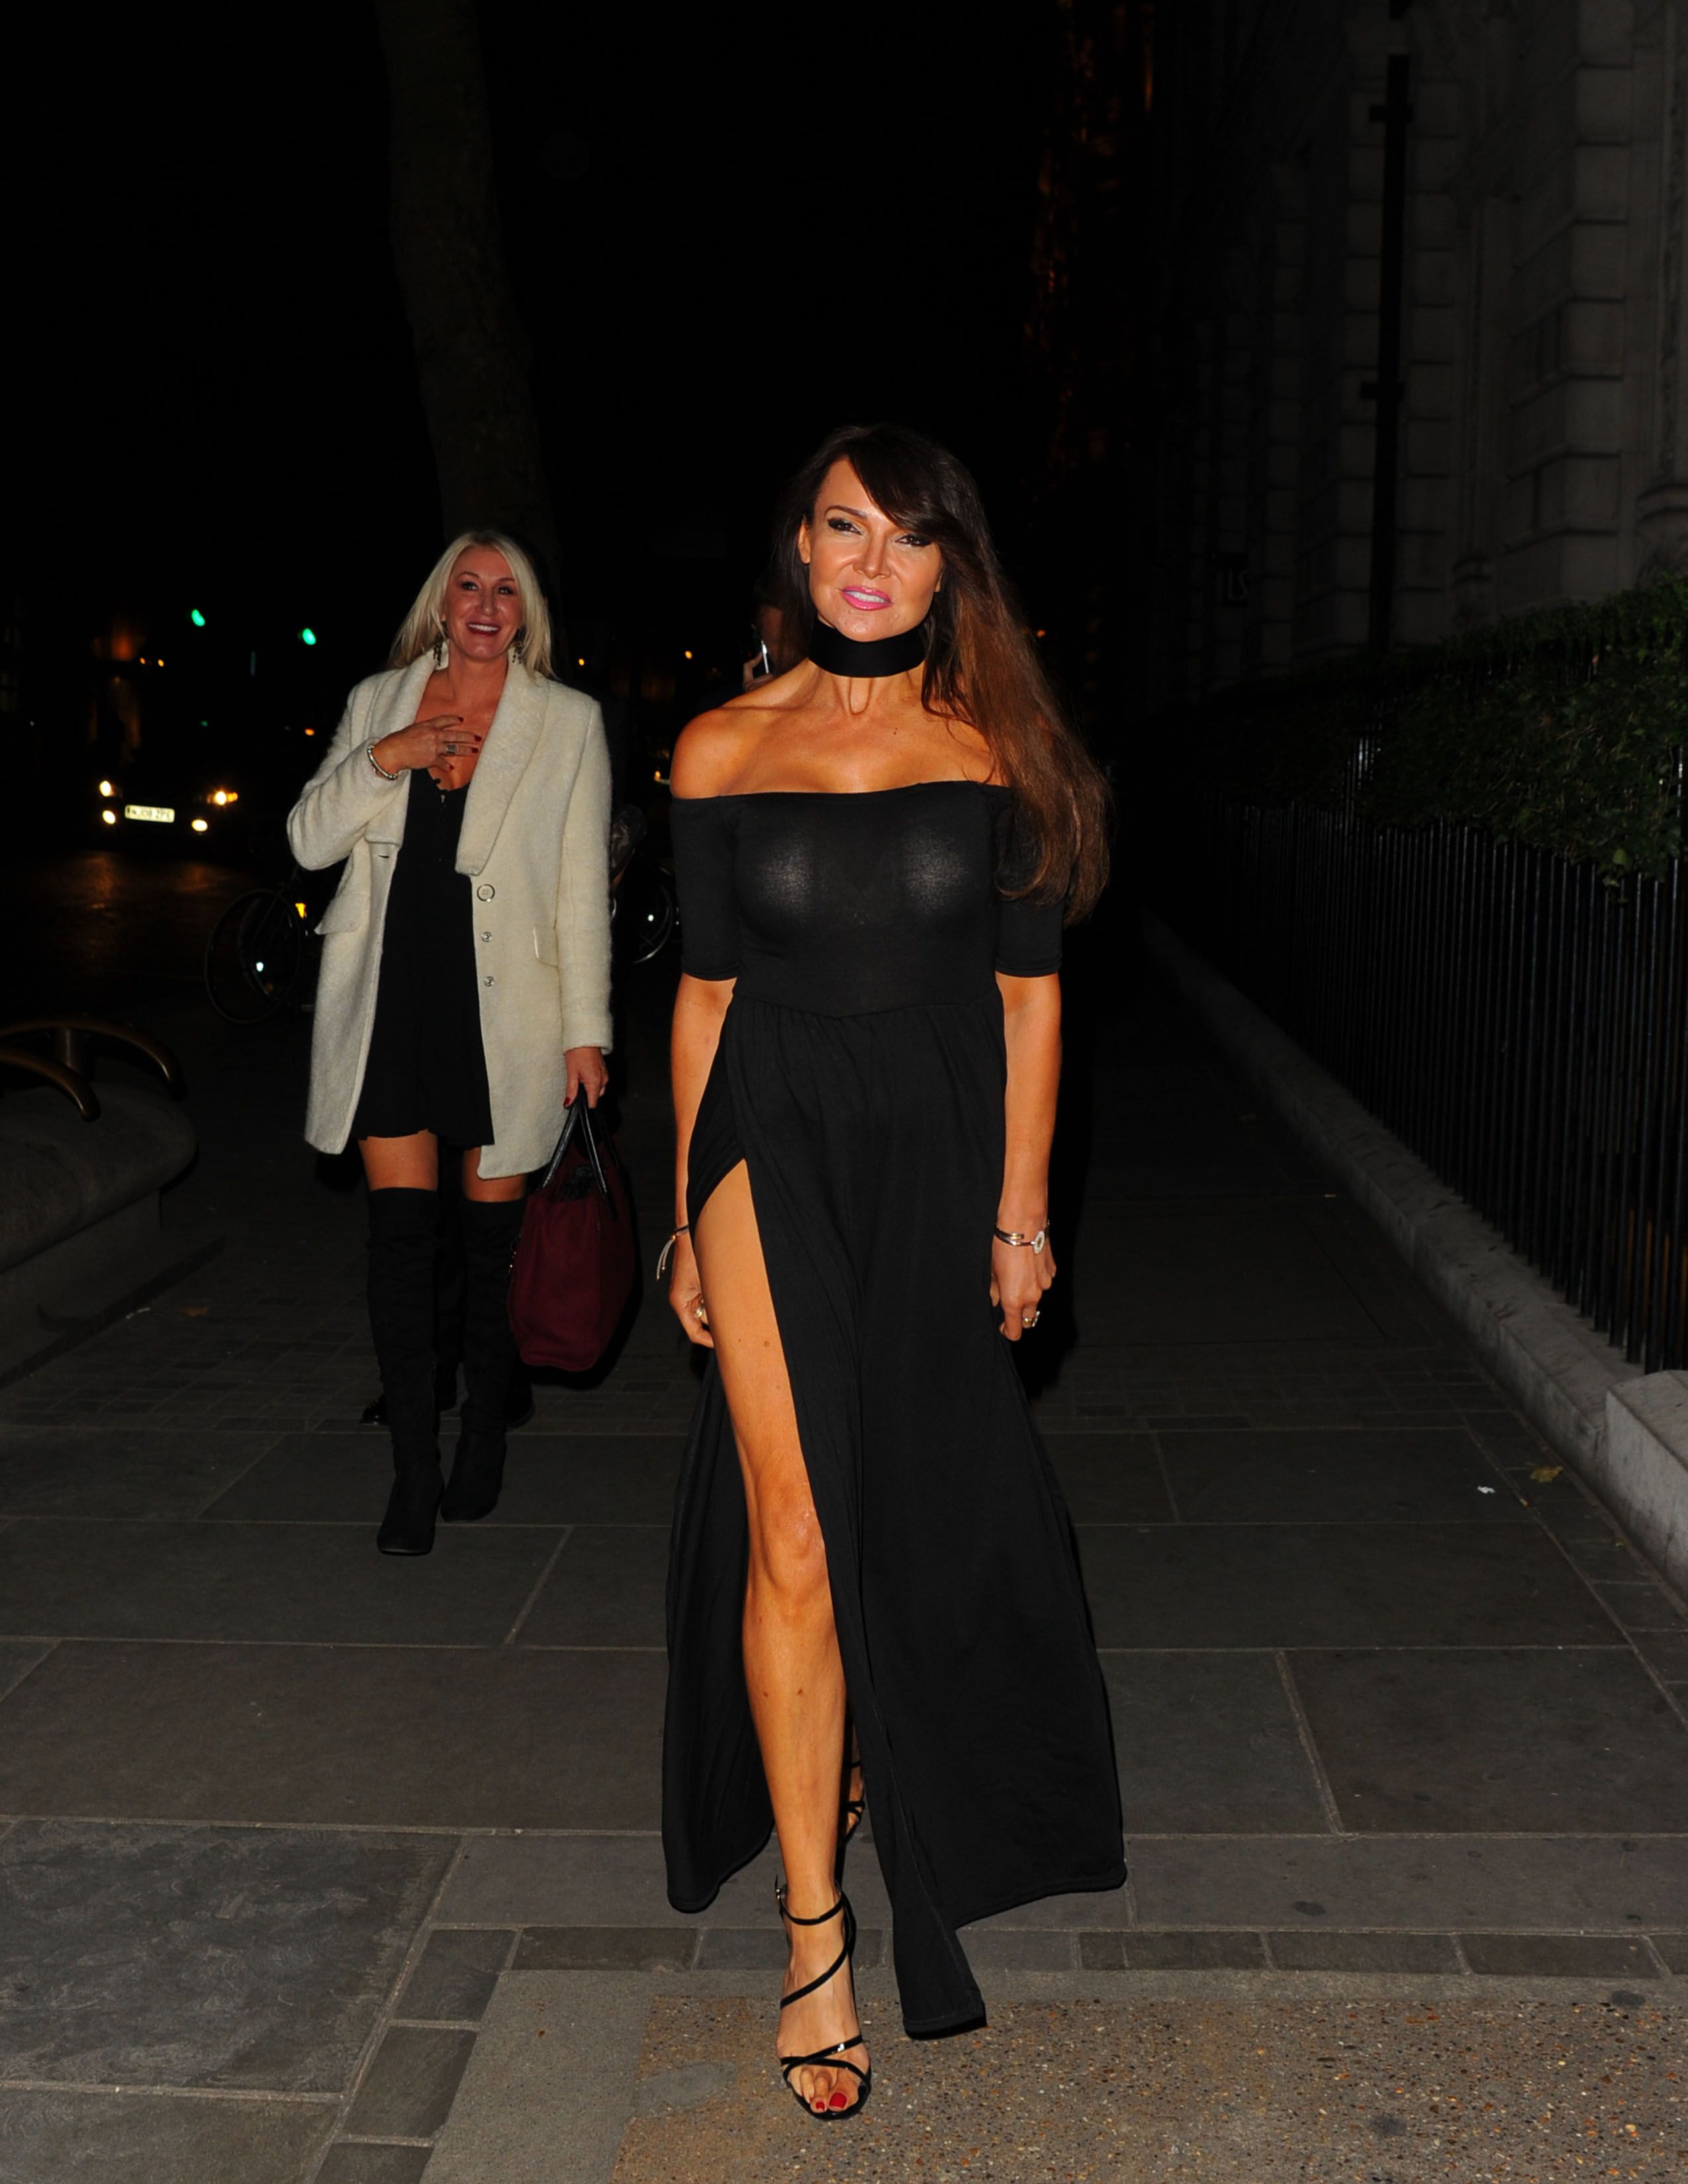 Pantyless Pics of Lizzie Cundy